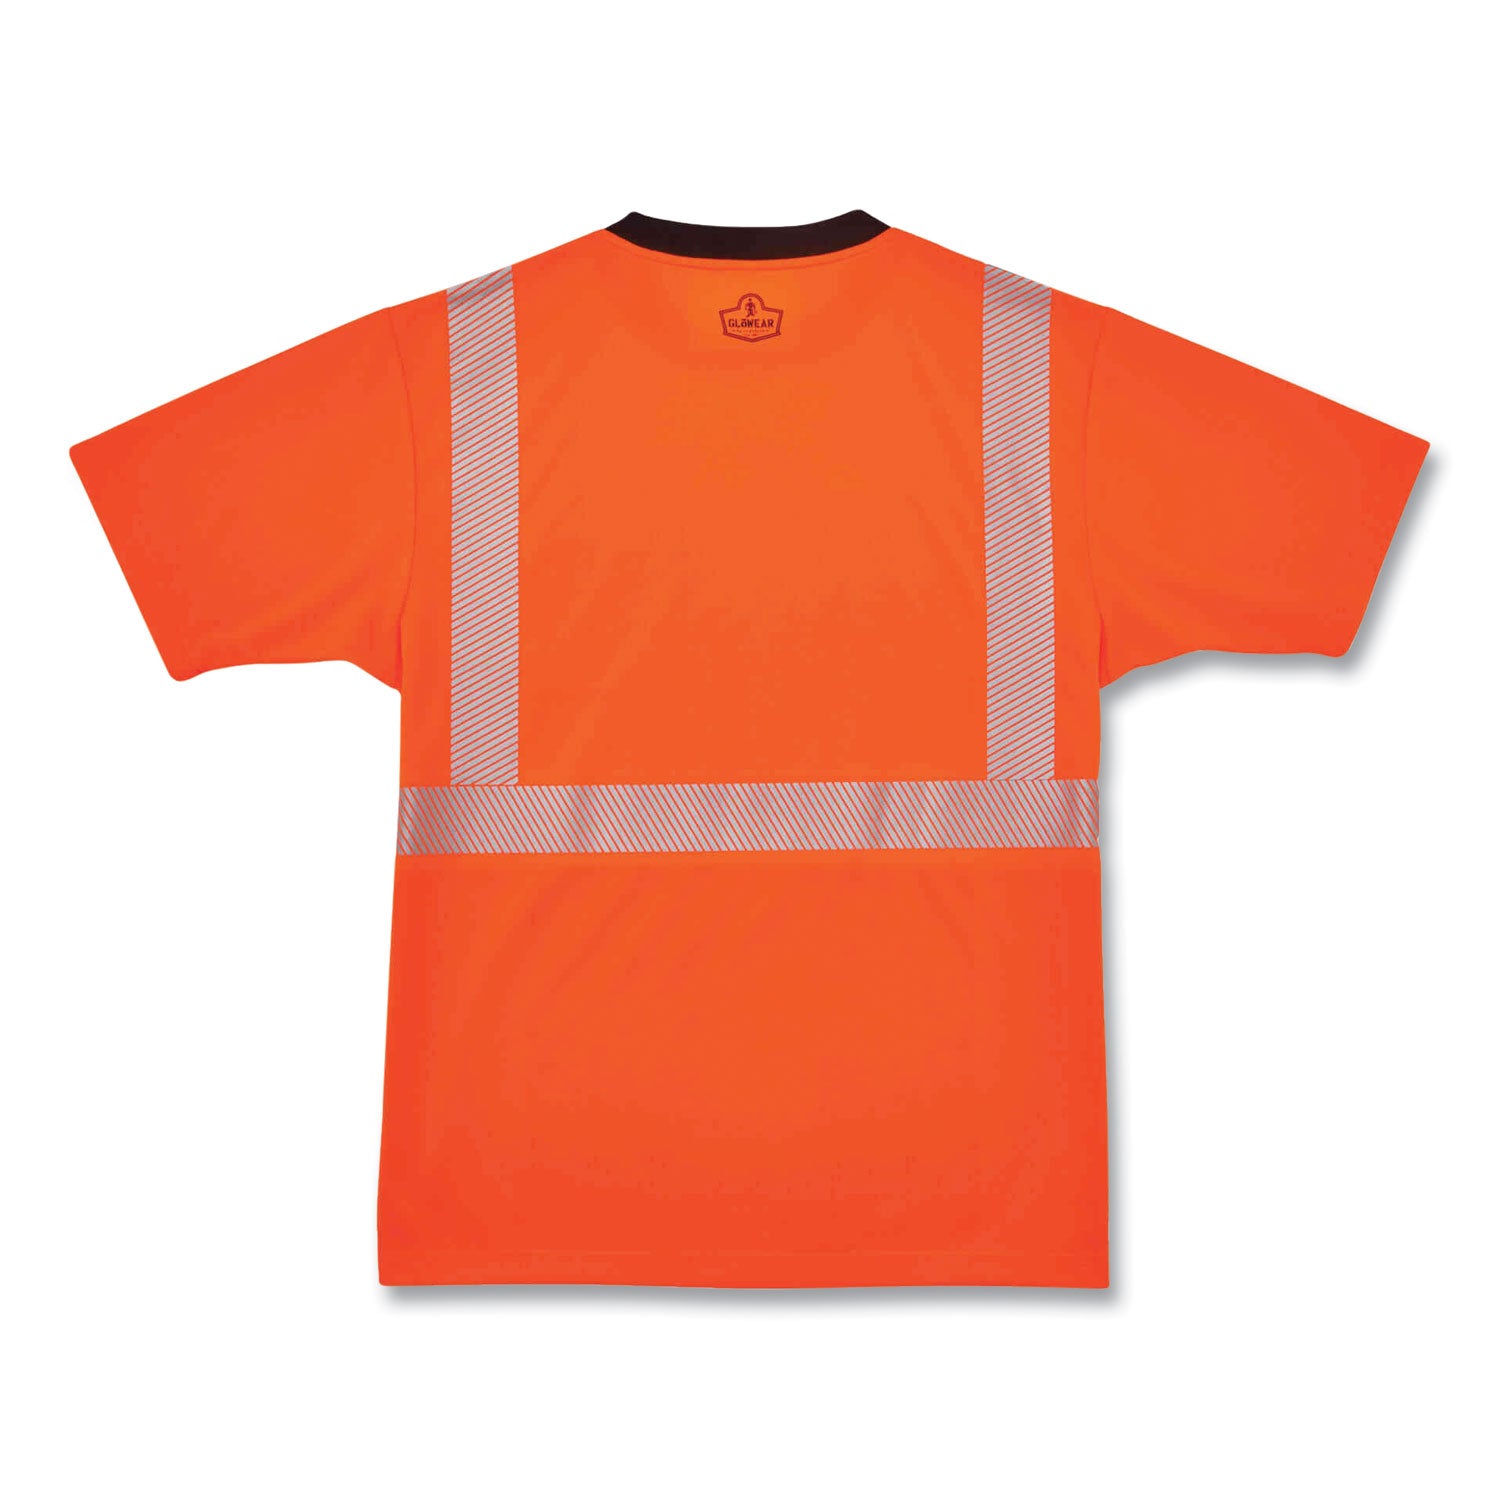 glowear-8280bk-class-2-performance-t-shirt-with-black-bottom-polyester-5x-large-orange-ships-in-1-3-business-days_ego22589 - 3